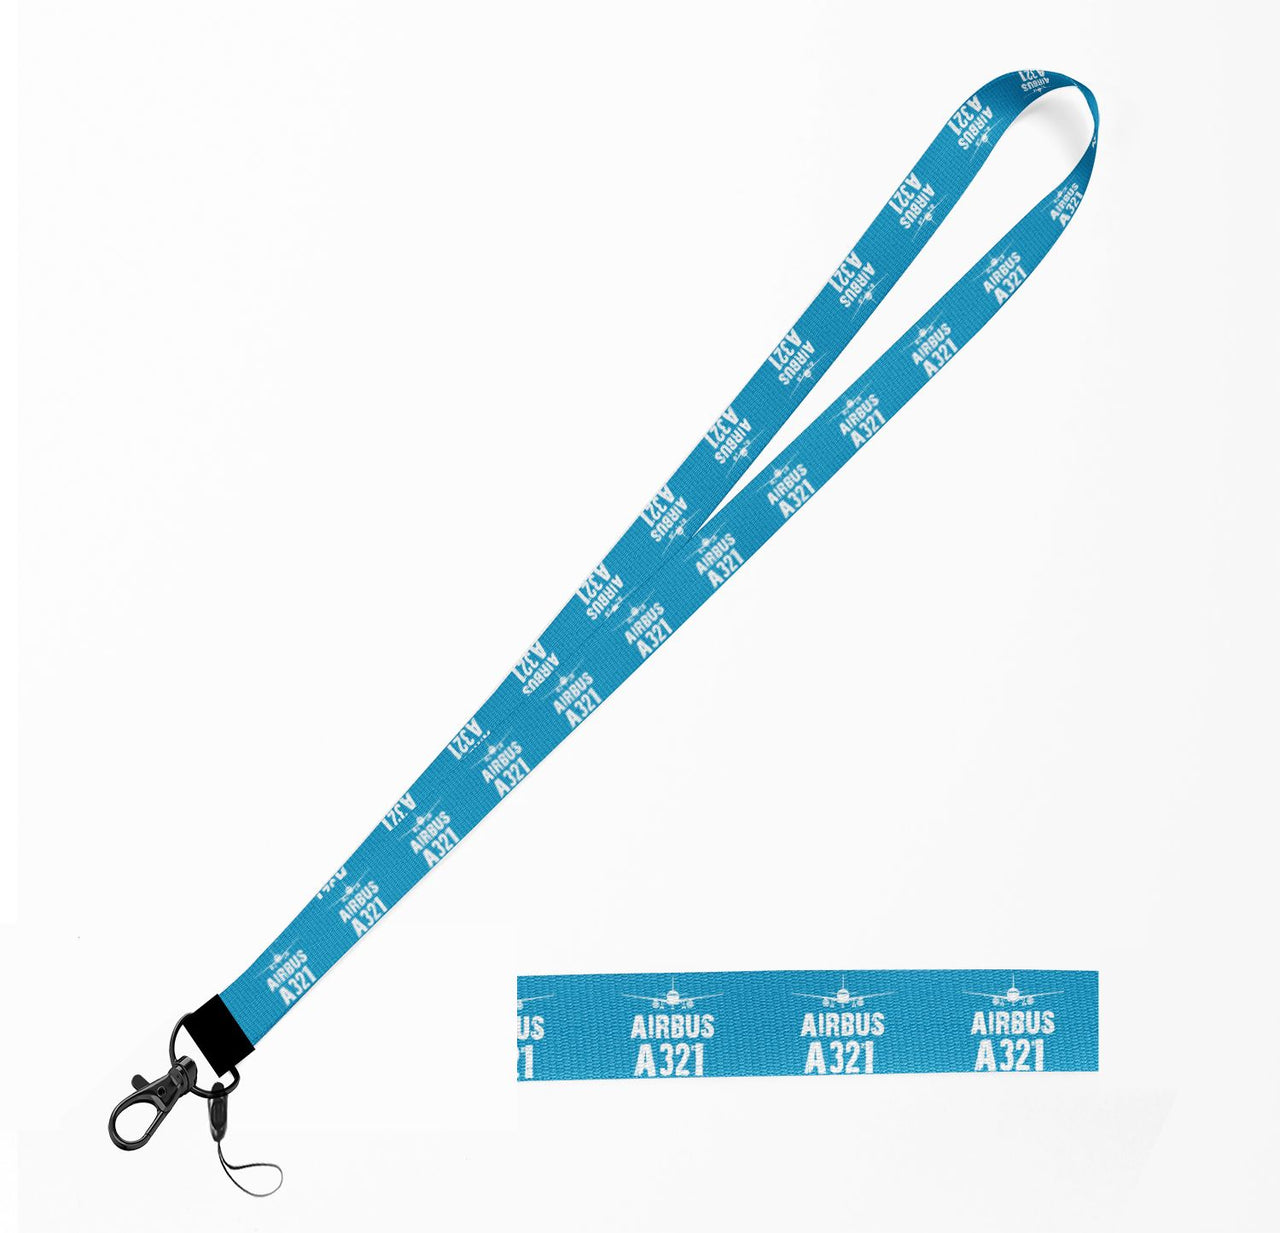 Airbus A321 & Plane Designed Lanyard & ID Holders